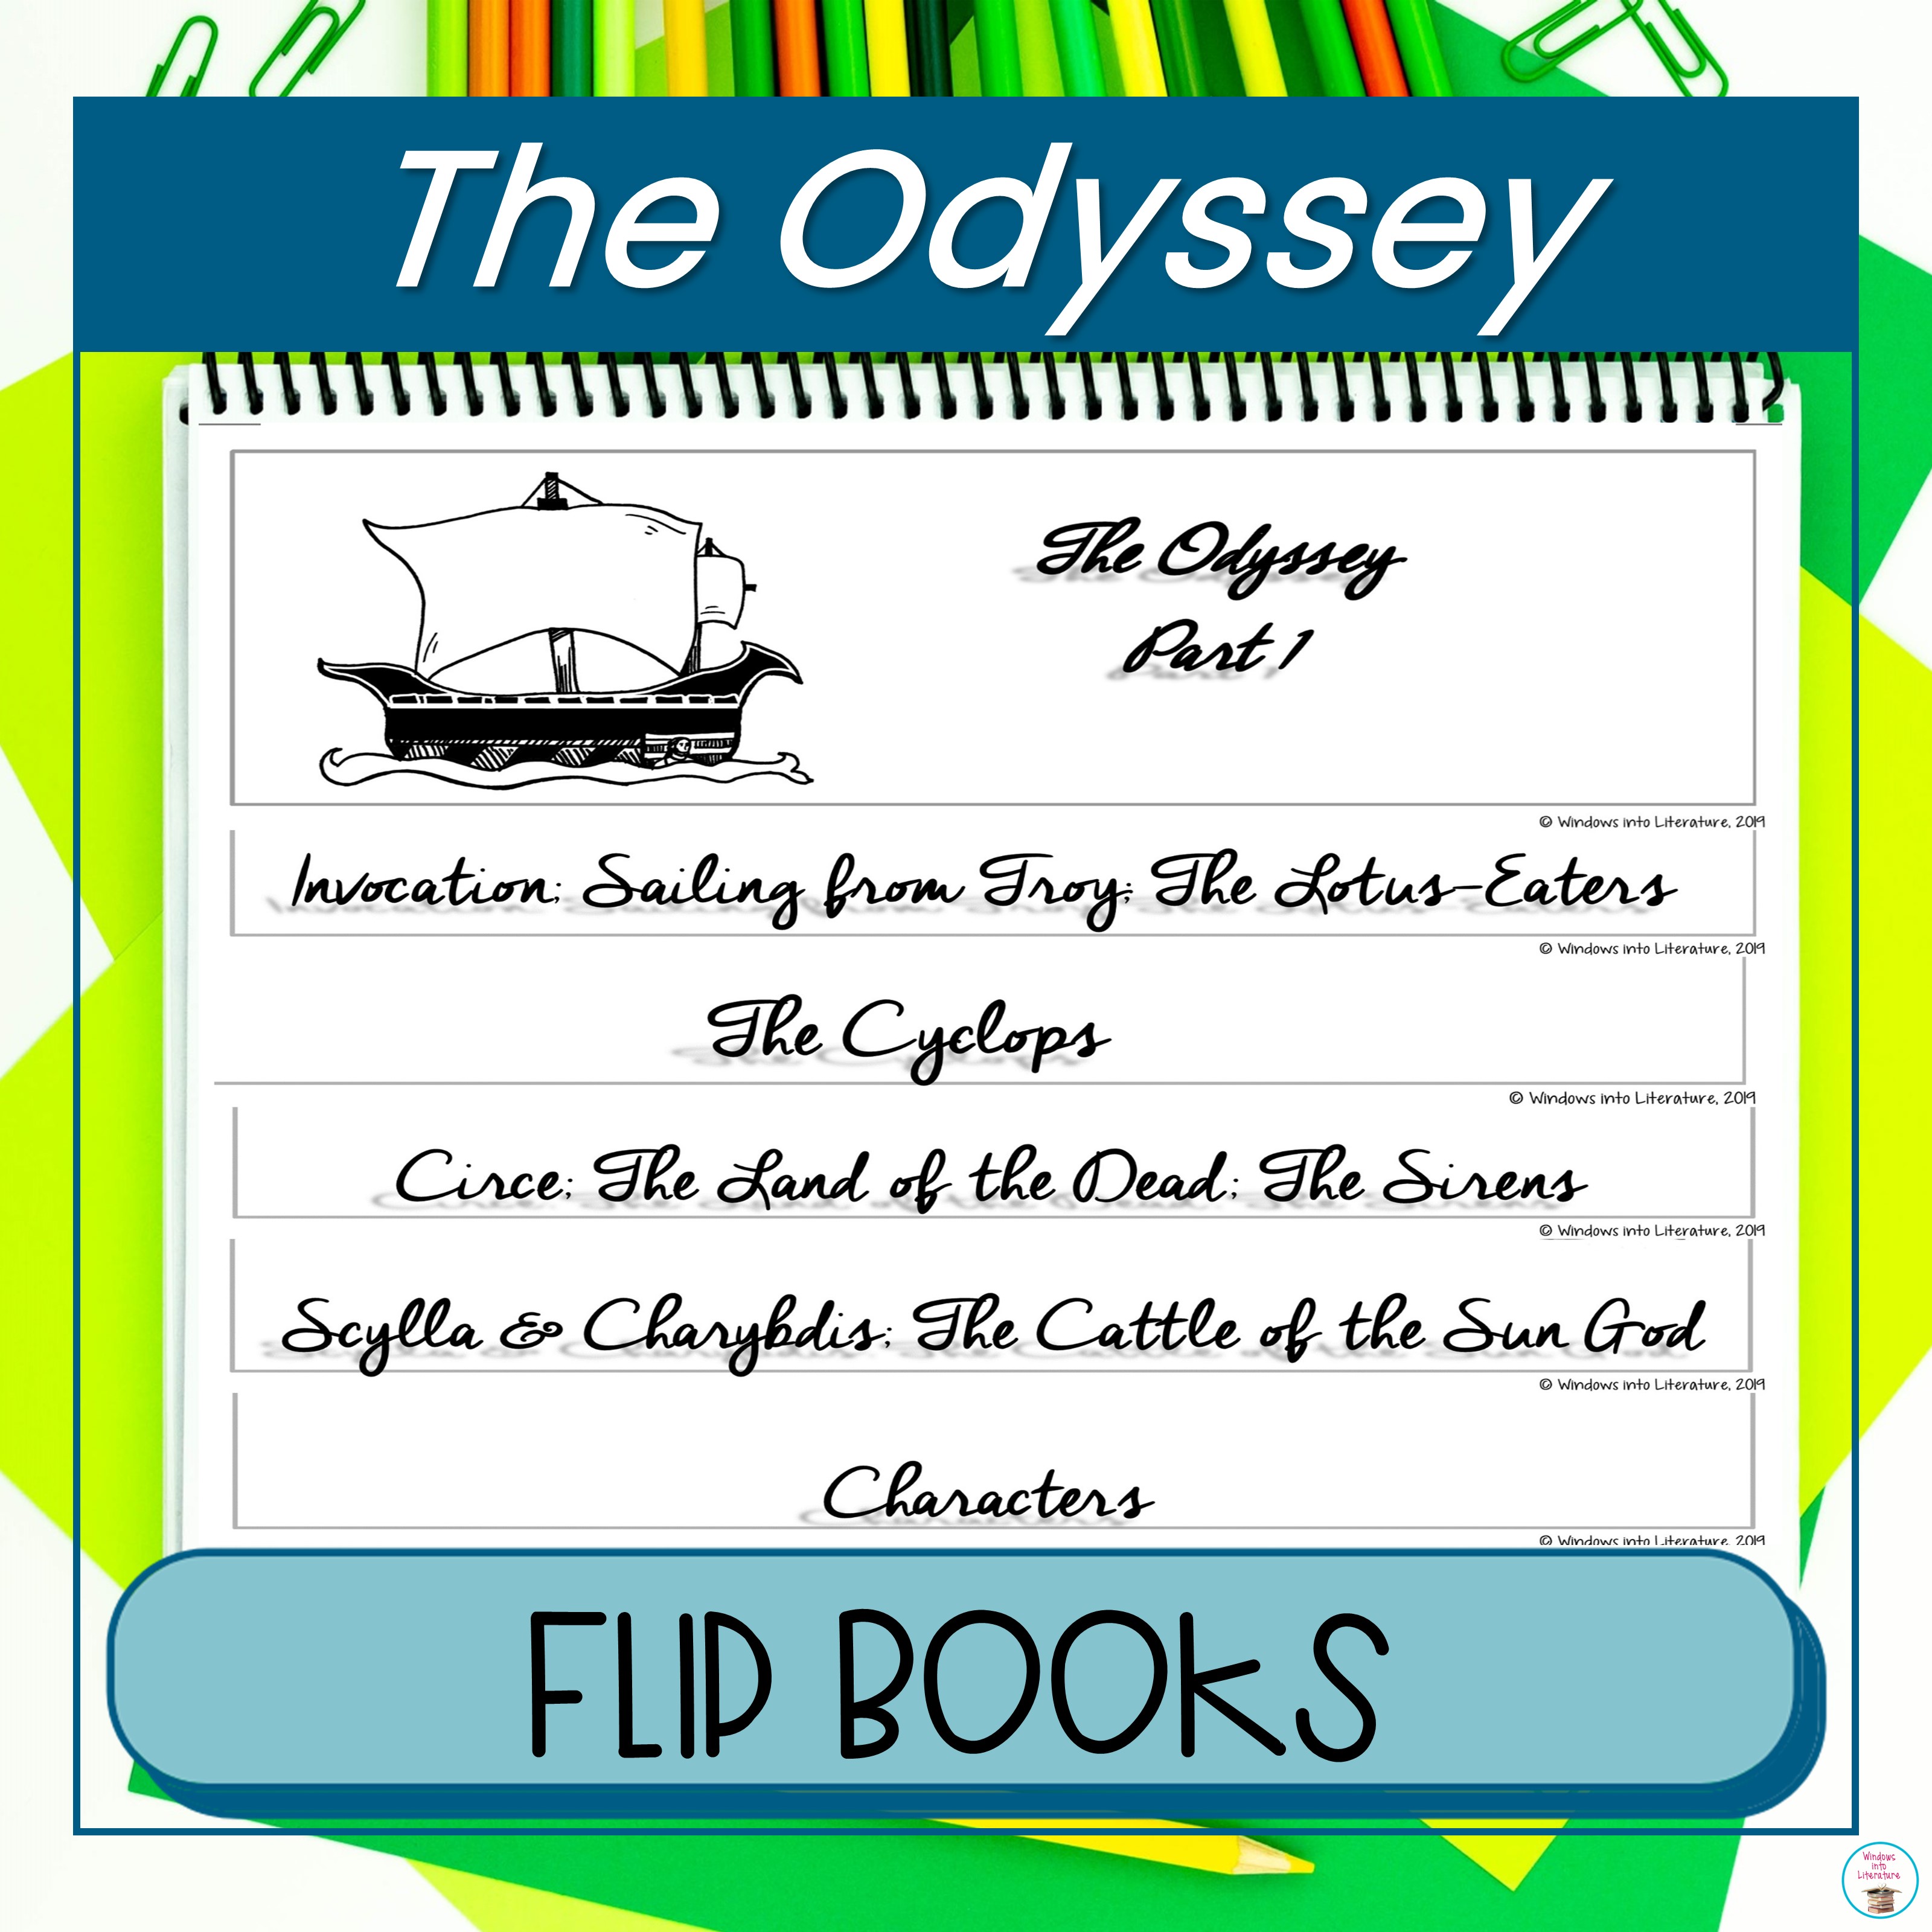 The Odyssey Study Guide Flip Books